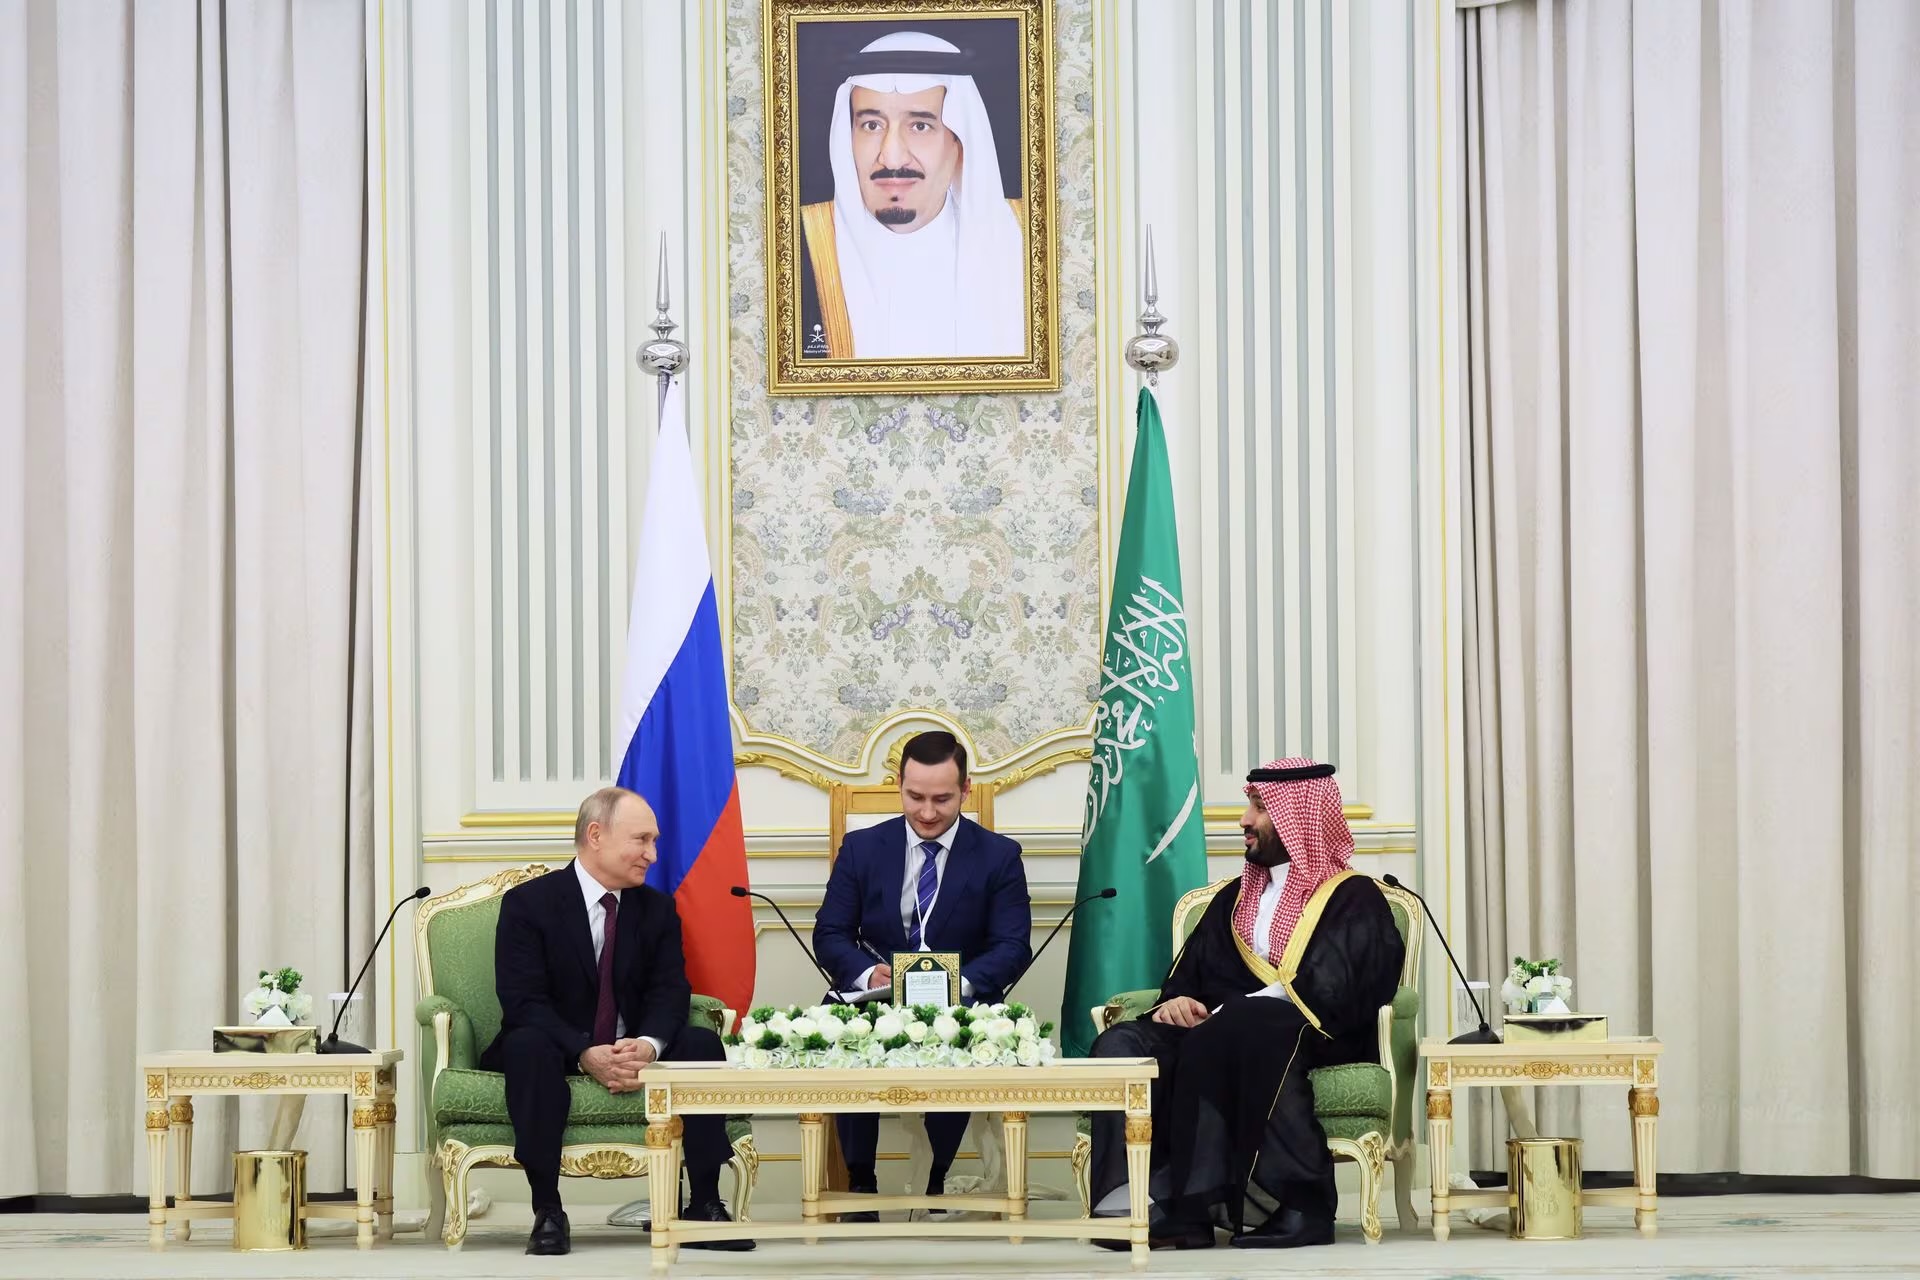 Putin and Saudi Crown Prince Lead OPEC+ for Oil Market Stability